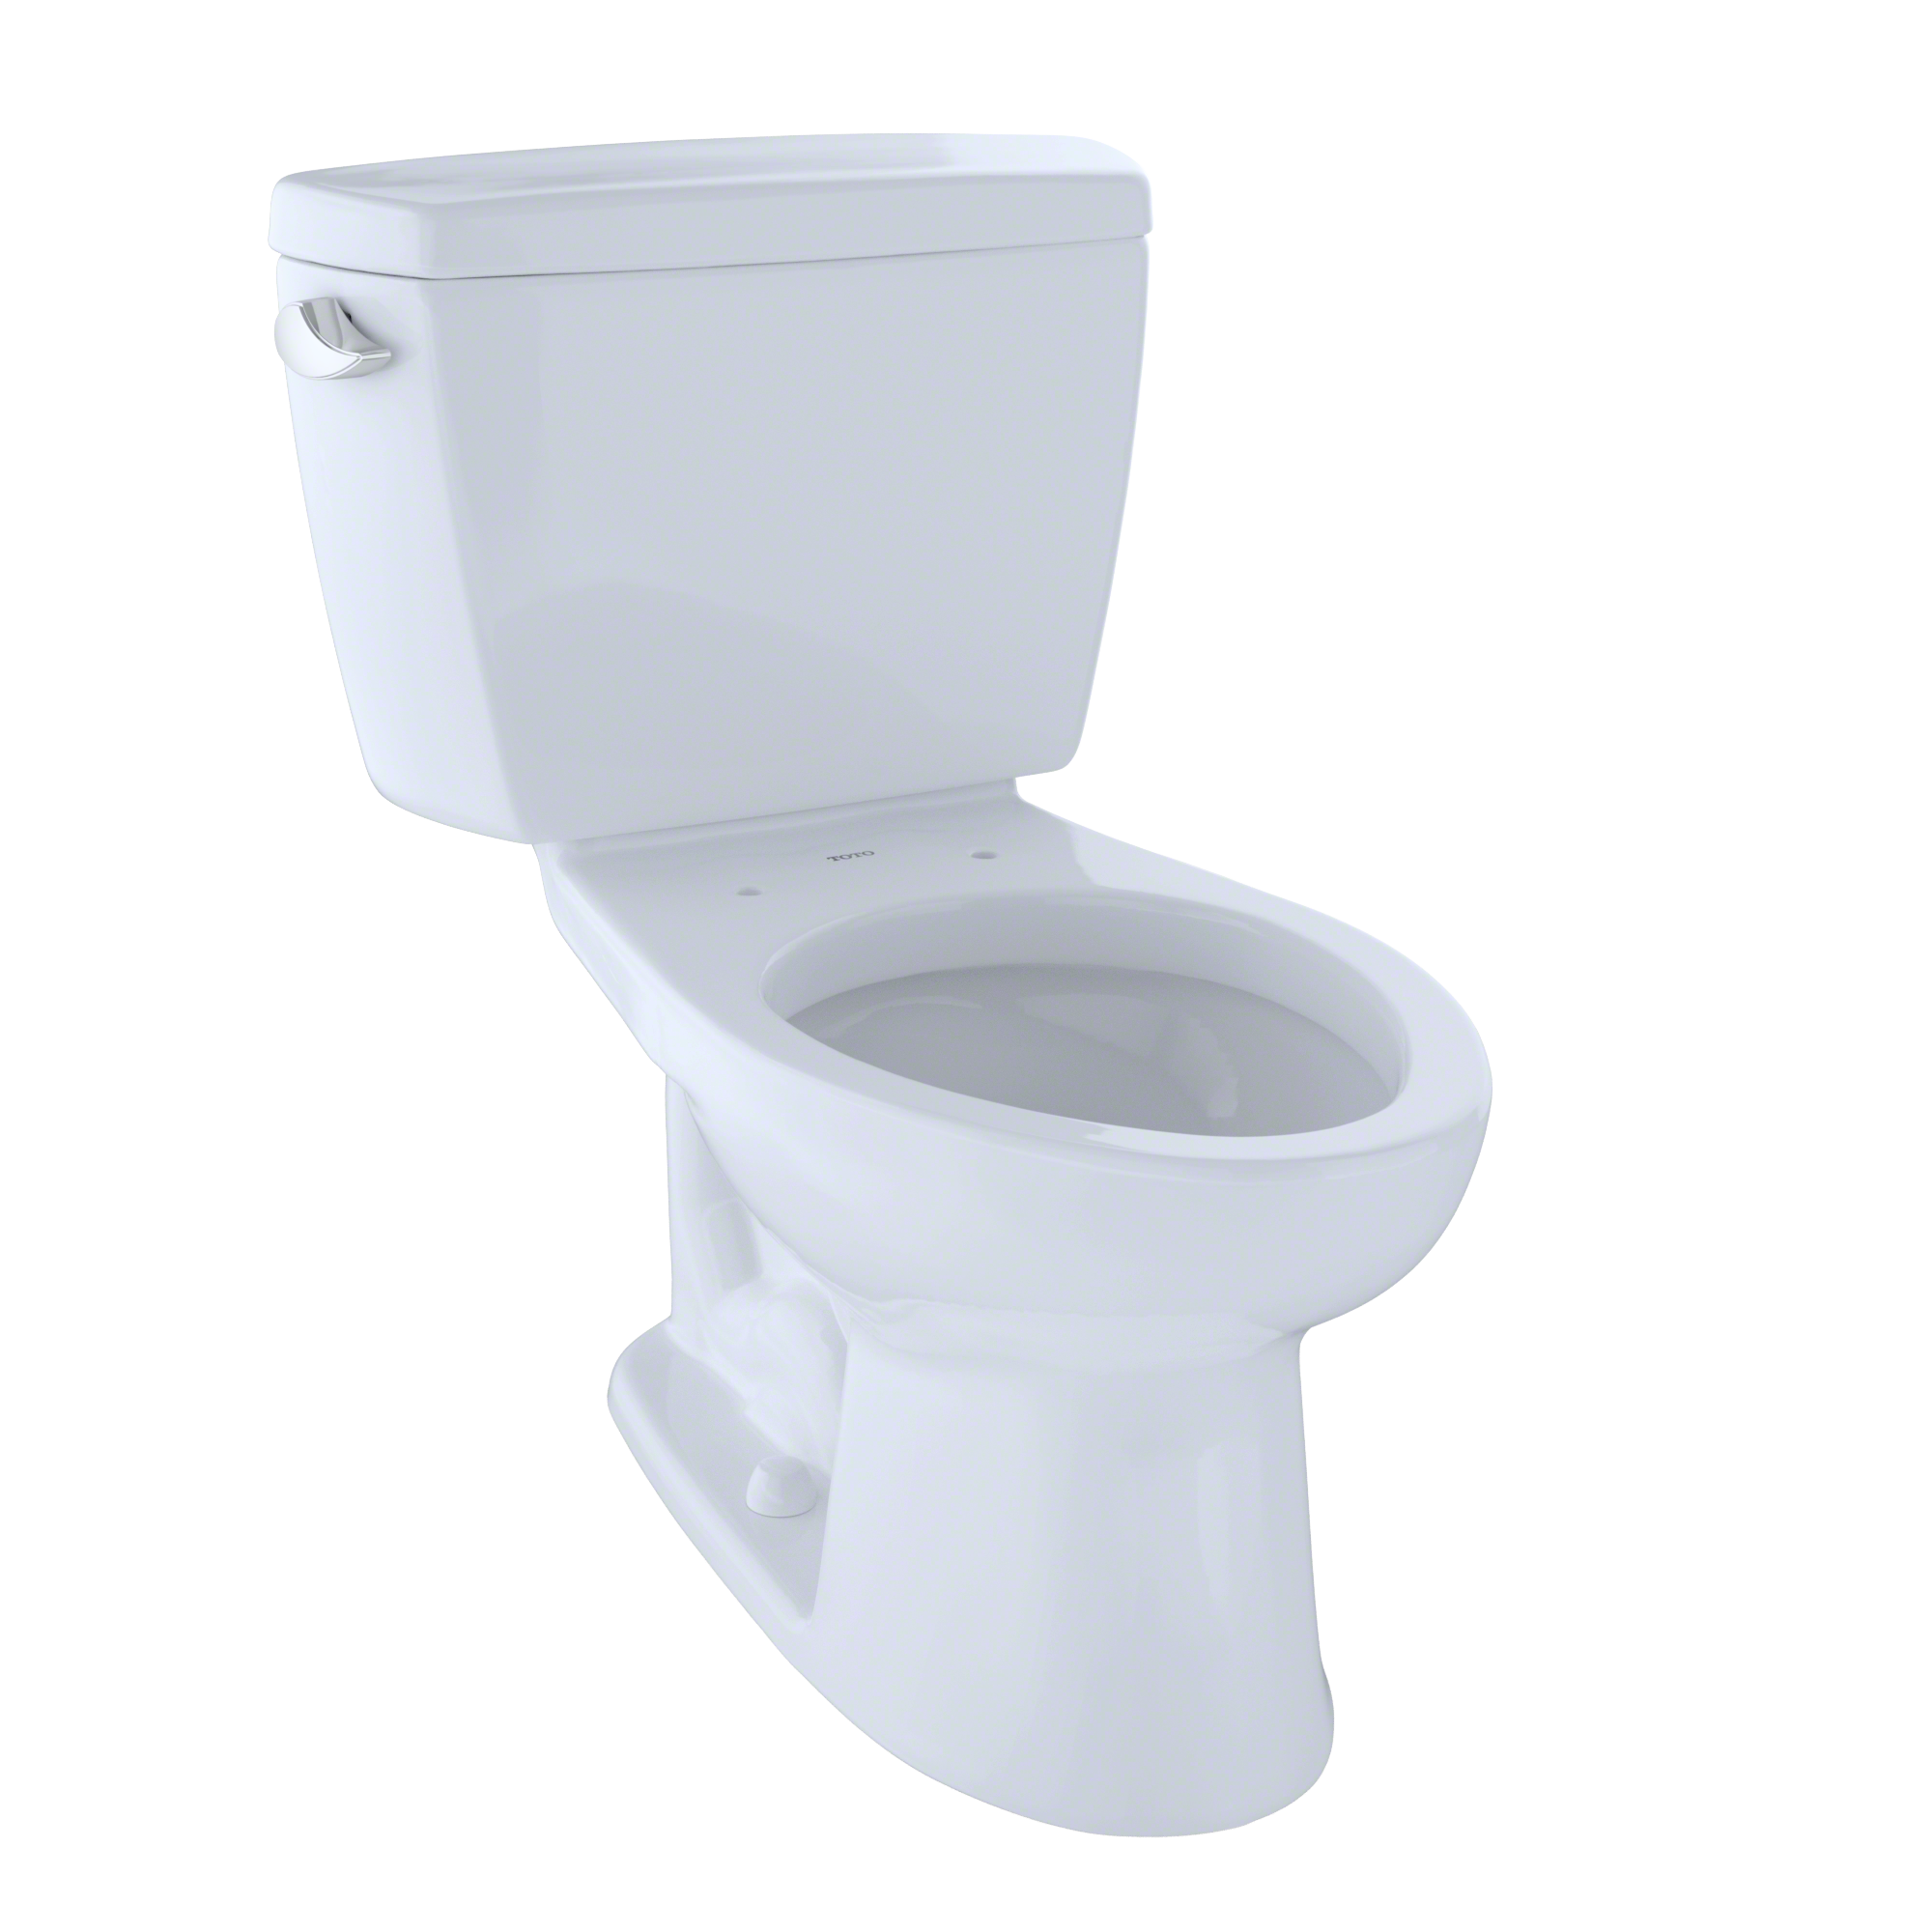 TOTO® Eco Drake® Two-Piece Elongated 1.28 GPF Toilet with CeFiONtect?, Cotton White - CST744EG#01 - image 1 of 2